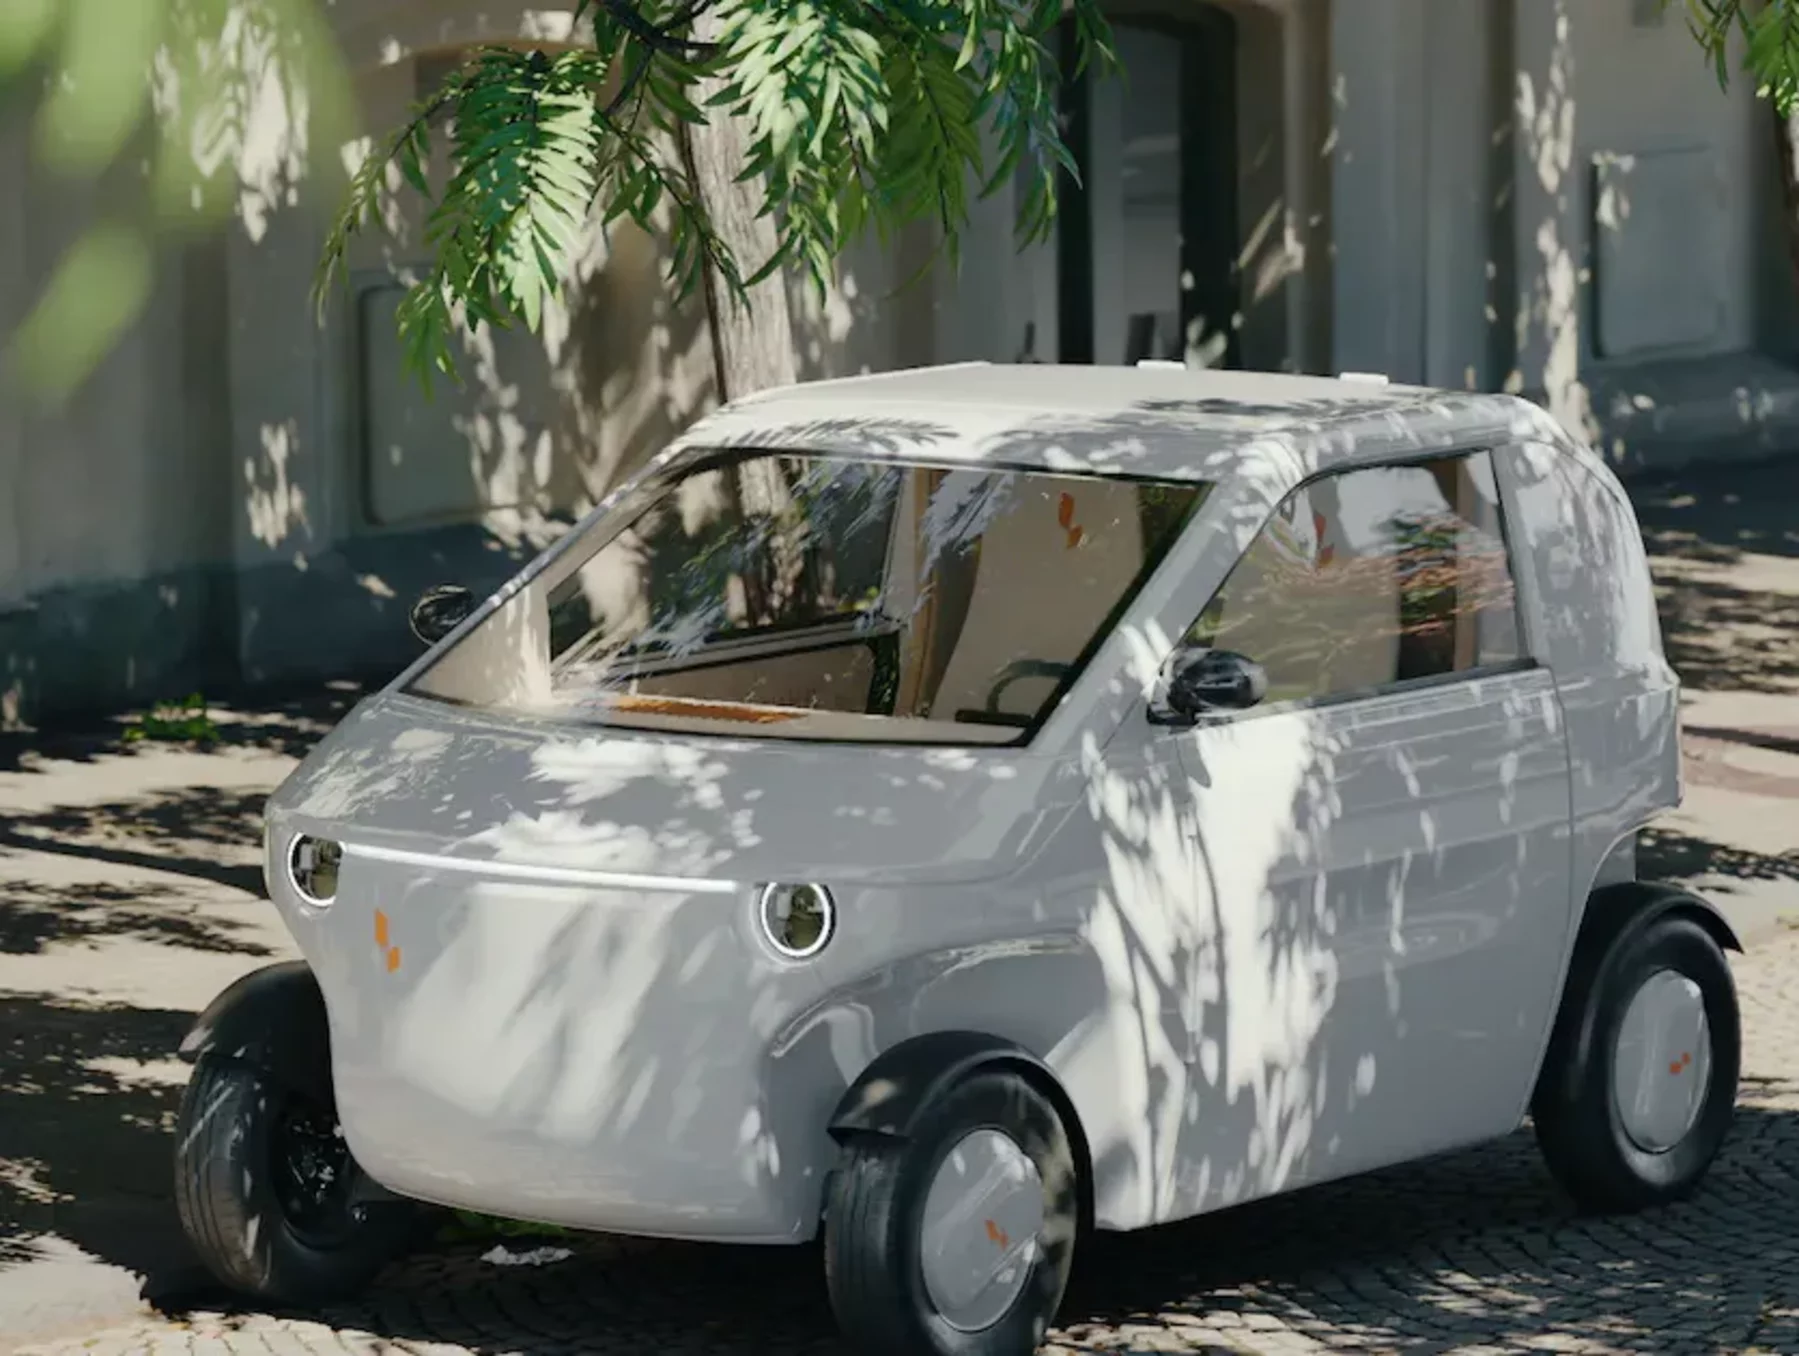 Luvly's sustainable flat-pack micro EV | EV Magazine